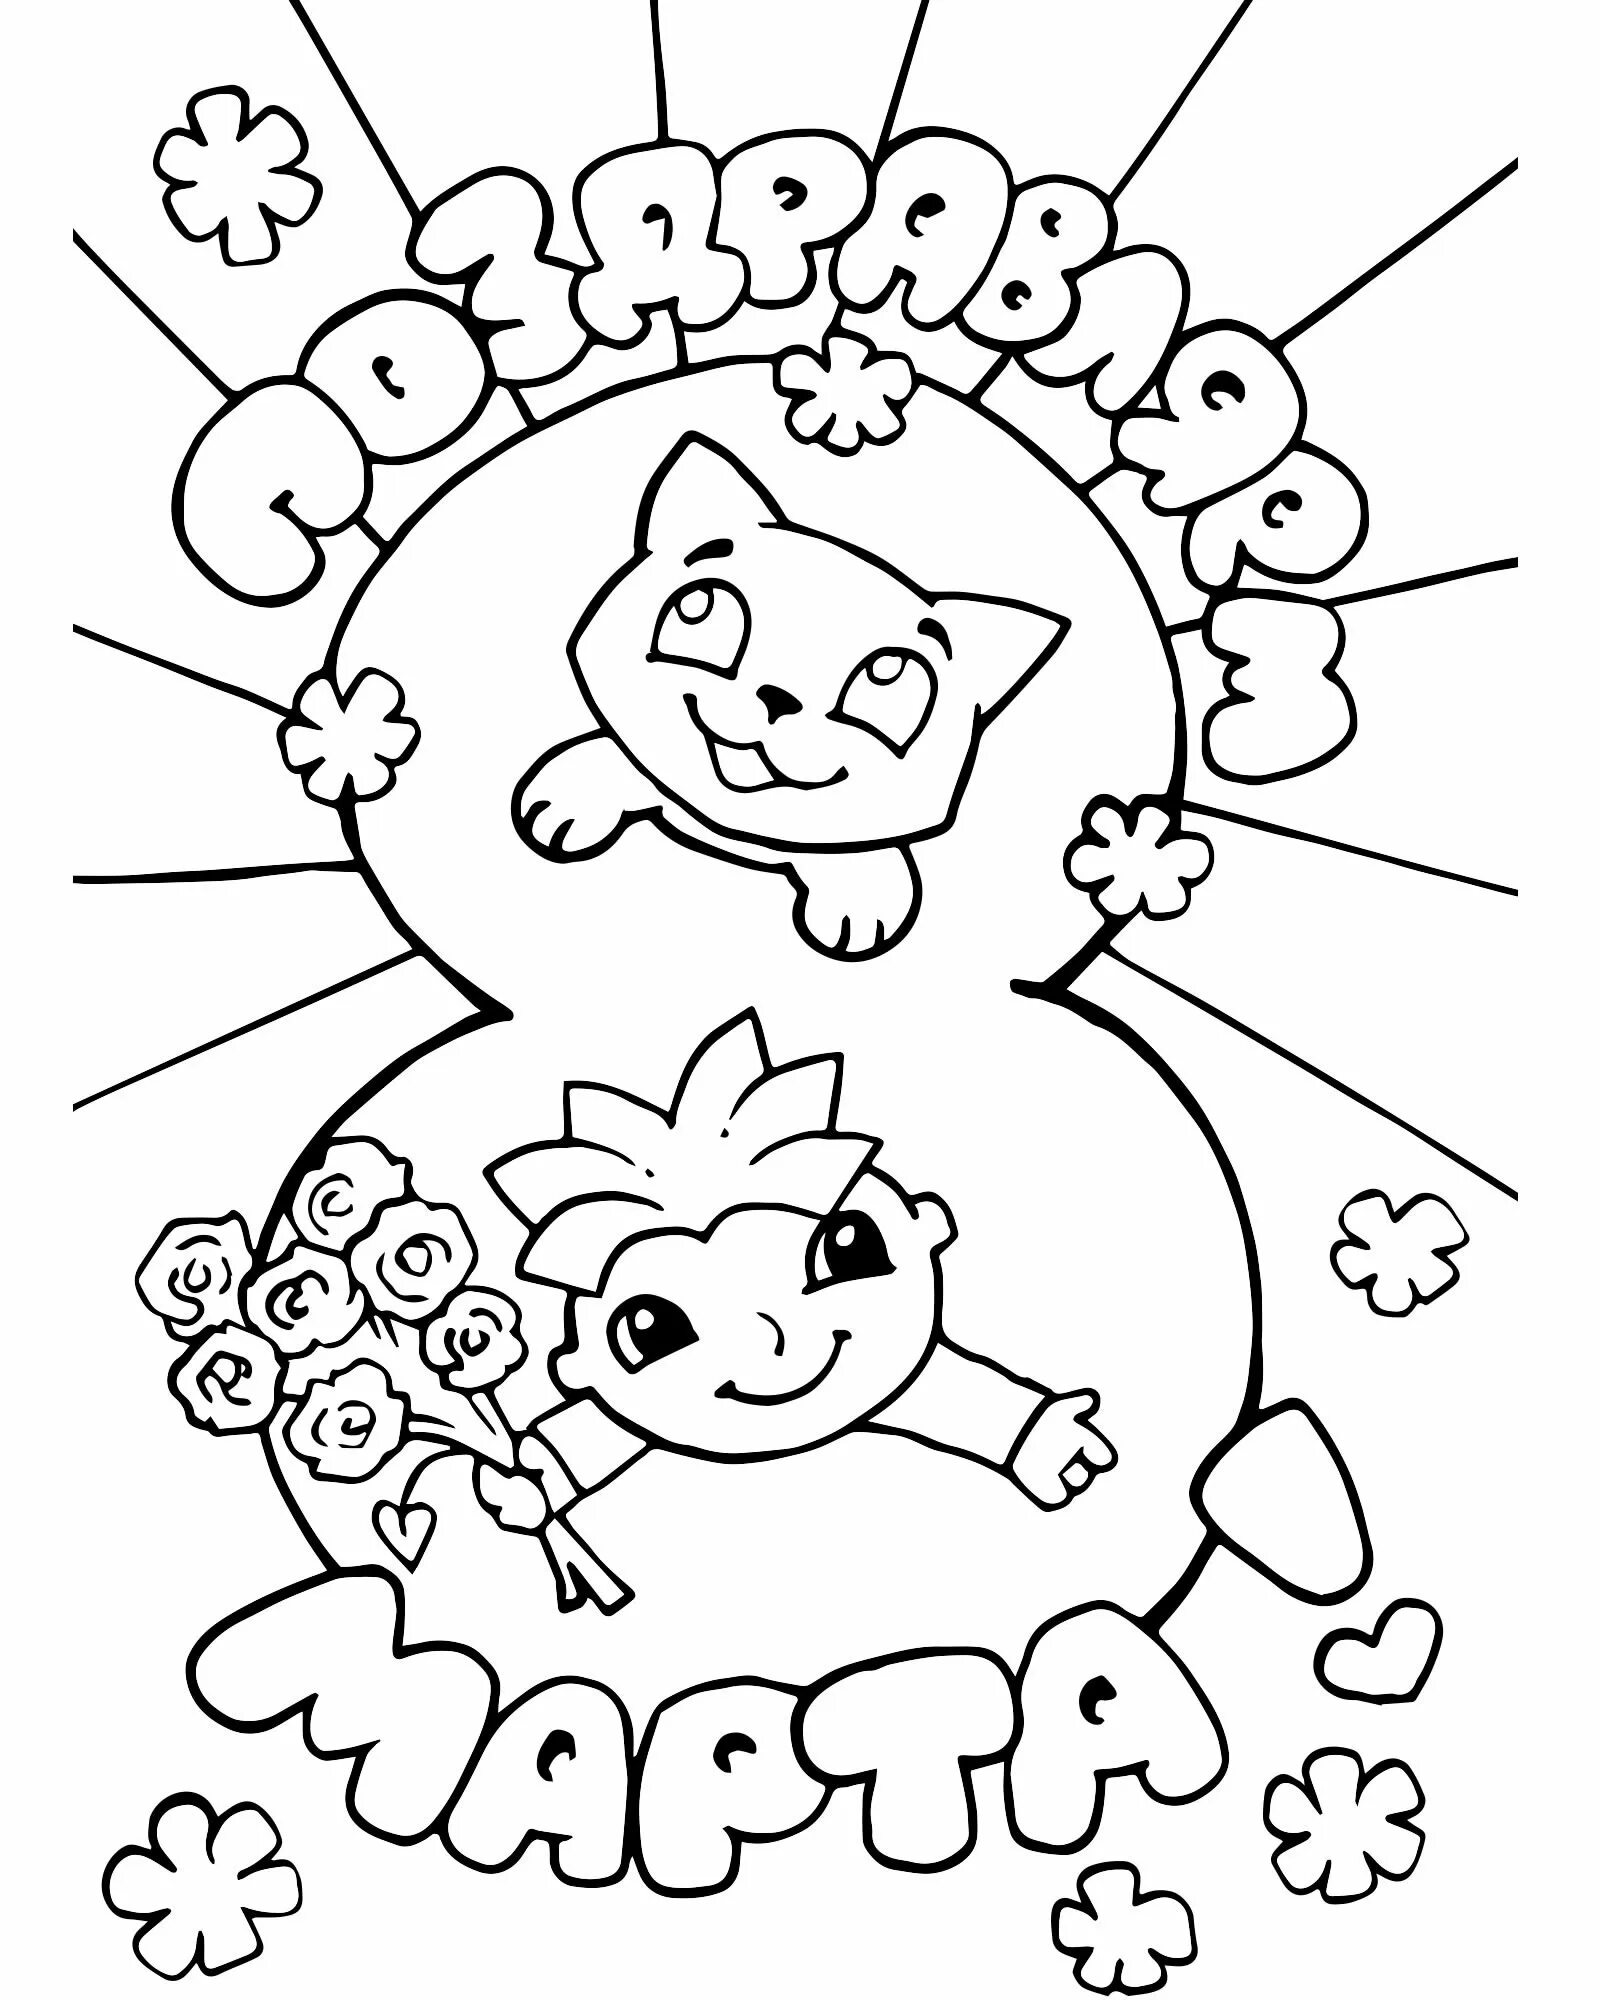 Coloring page sweet wall March 8 newspaper